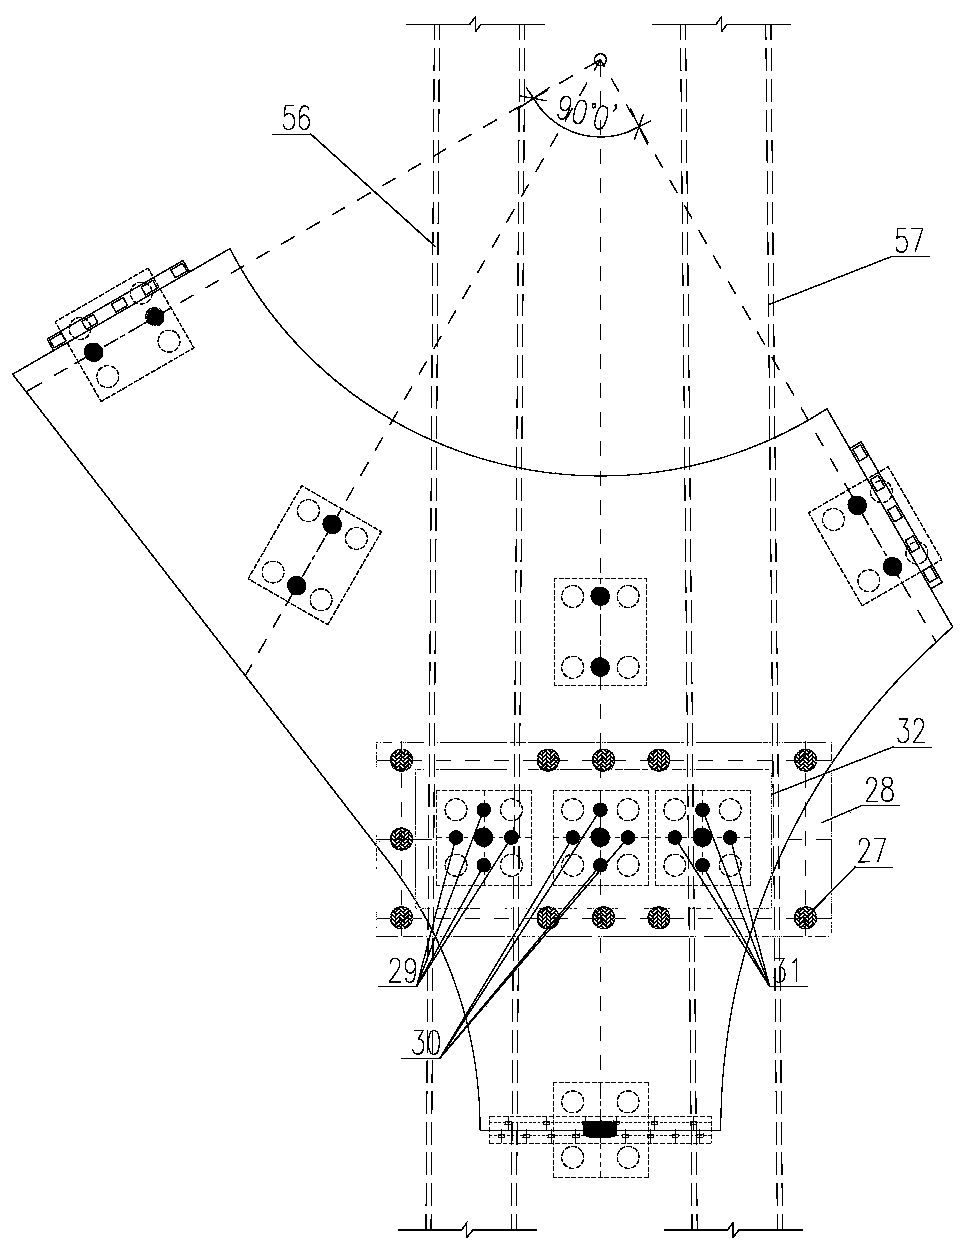 Lifting-force determination and displacement control method of active underpinning of statically indeterminate bridge pile foundations